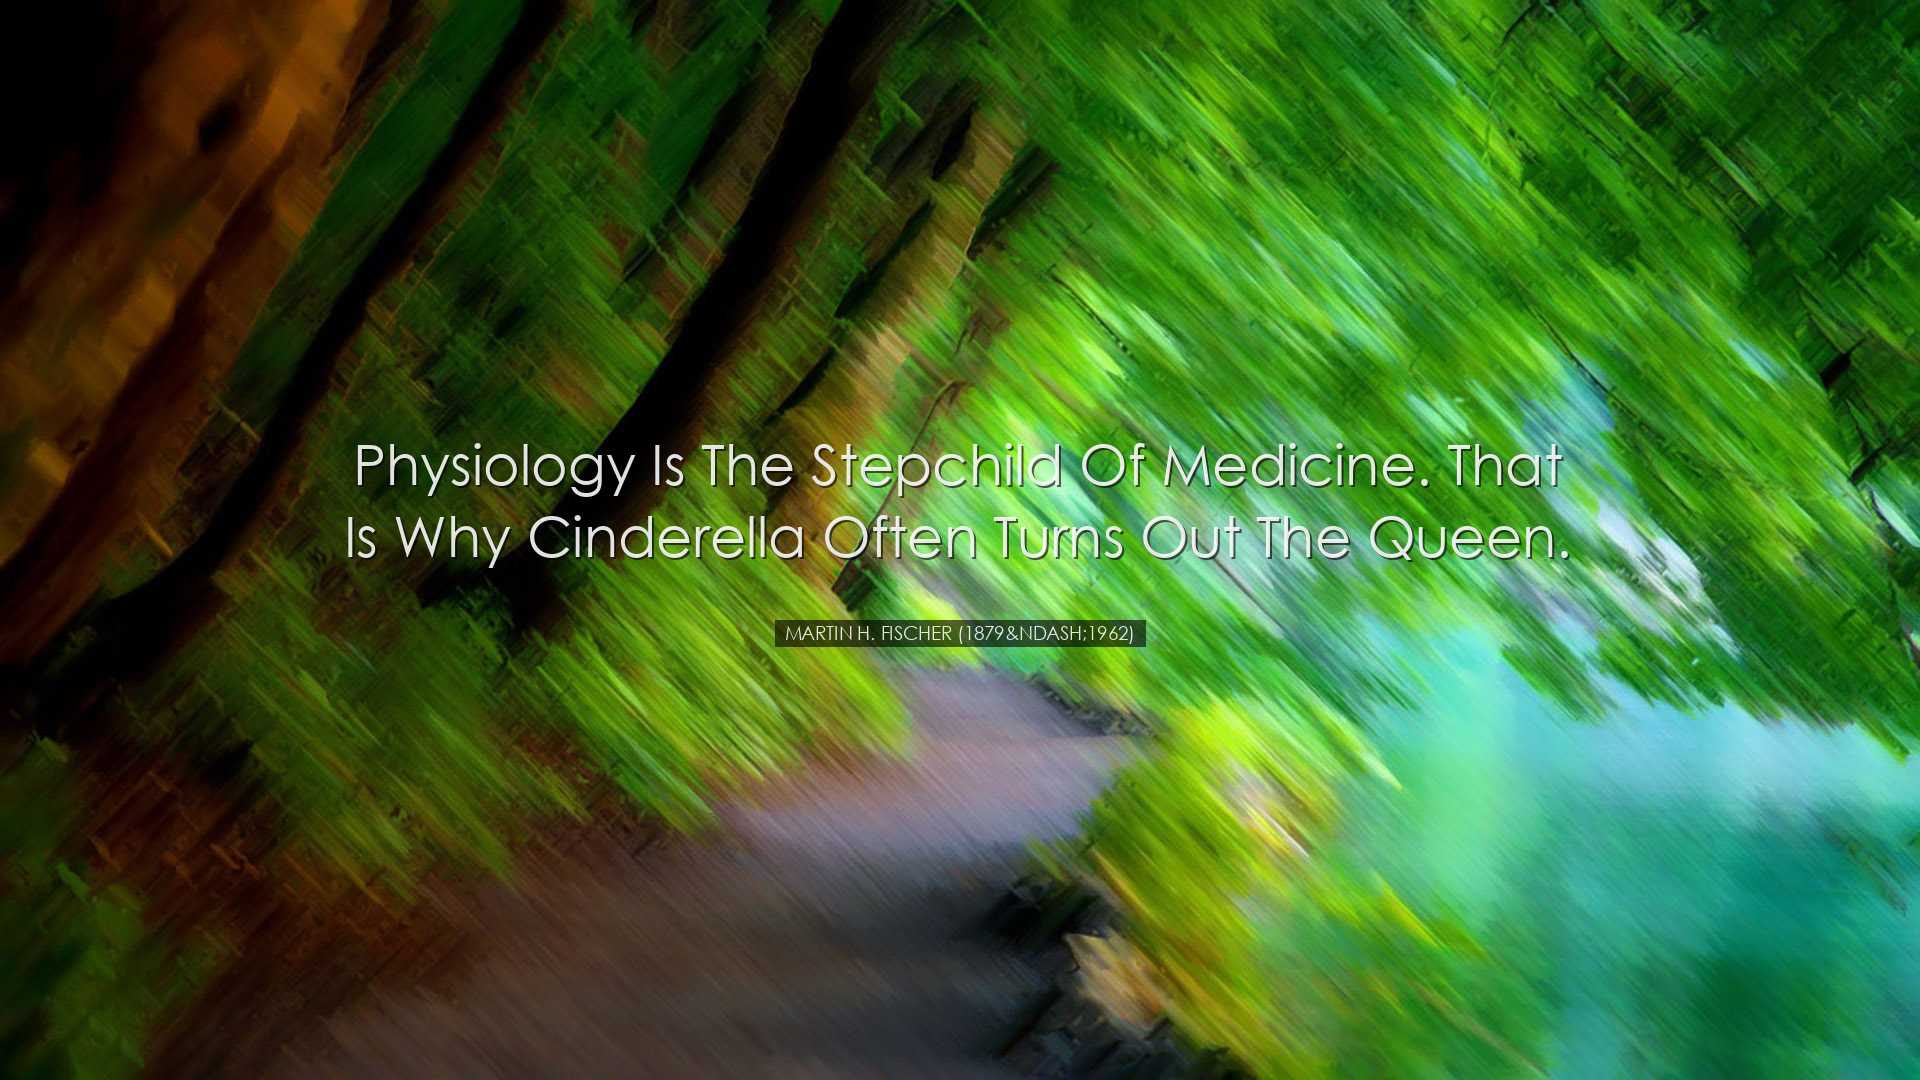 Physiology is the stepchild of medicine. That is why Cinderella of